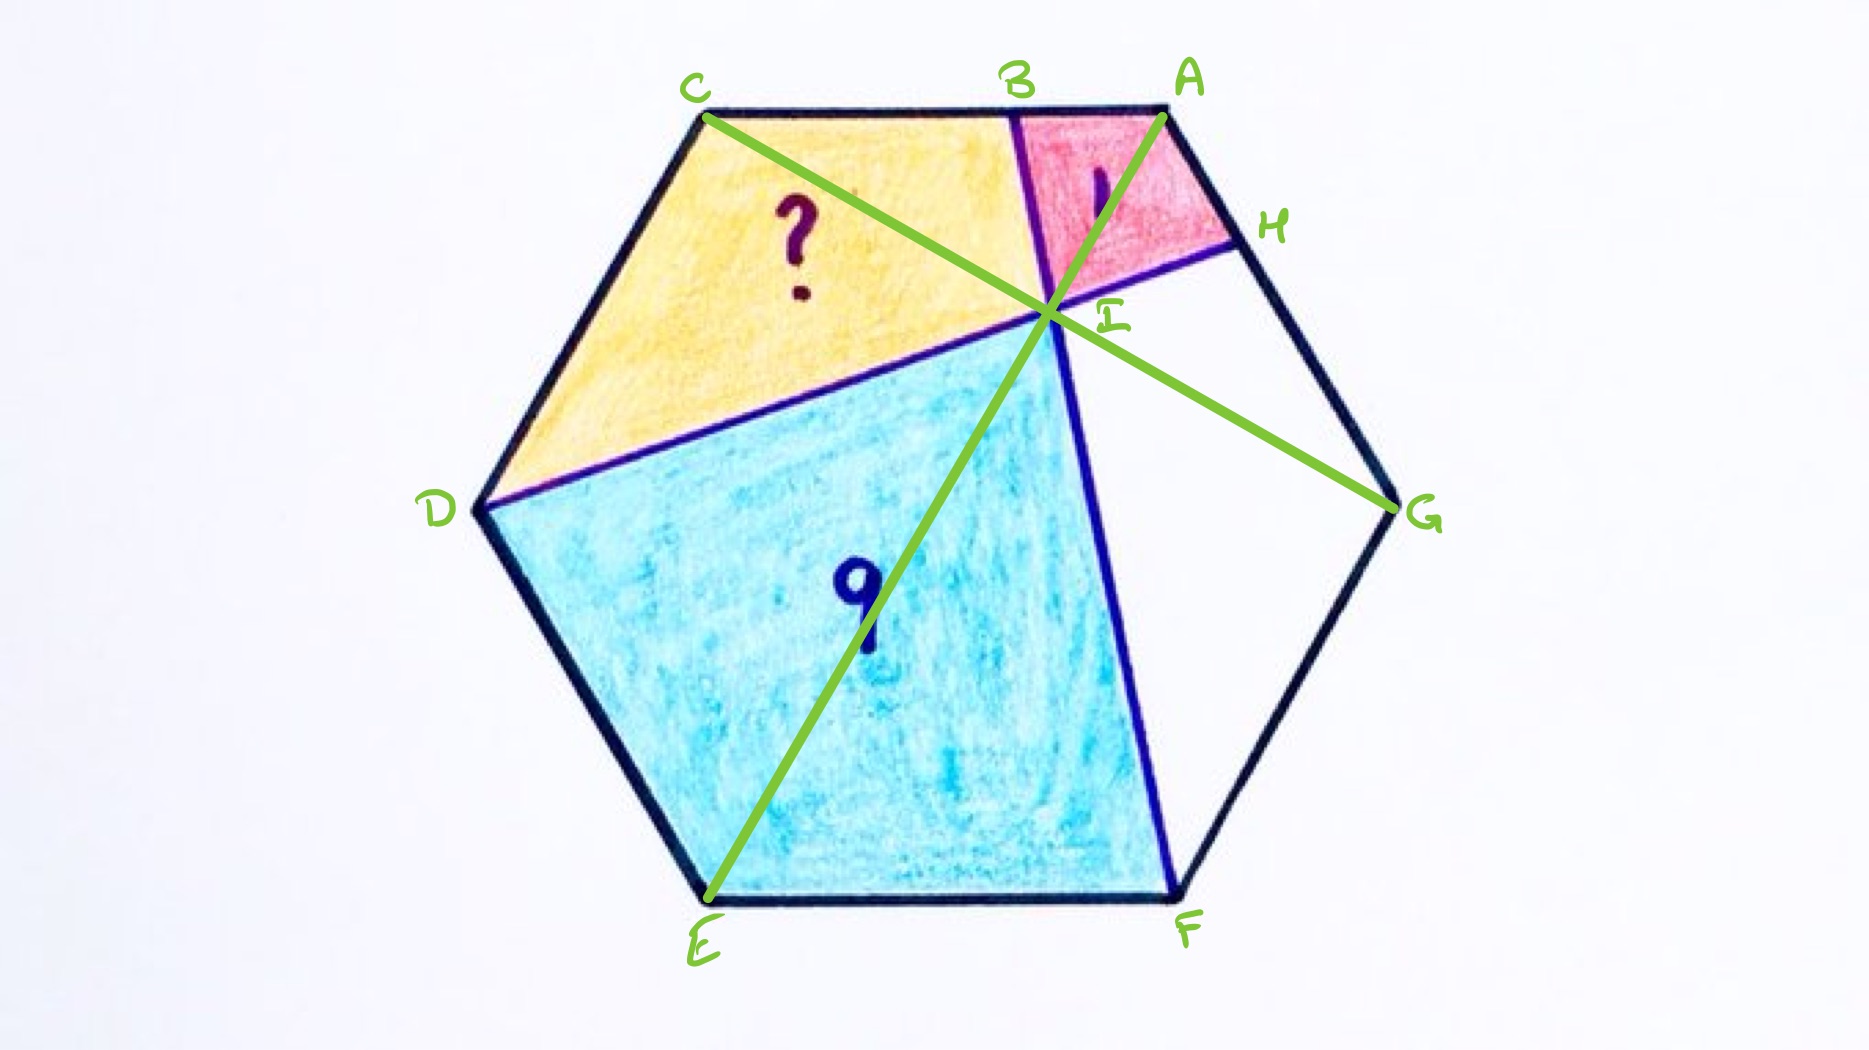 Divided hexagon iii labelled